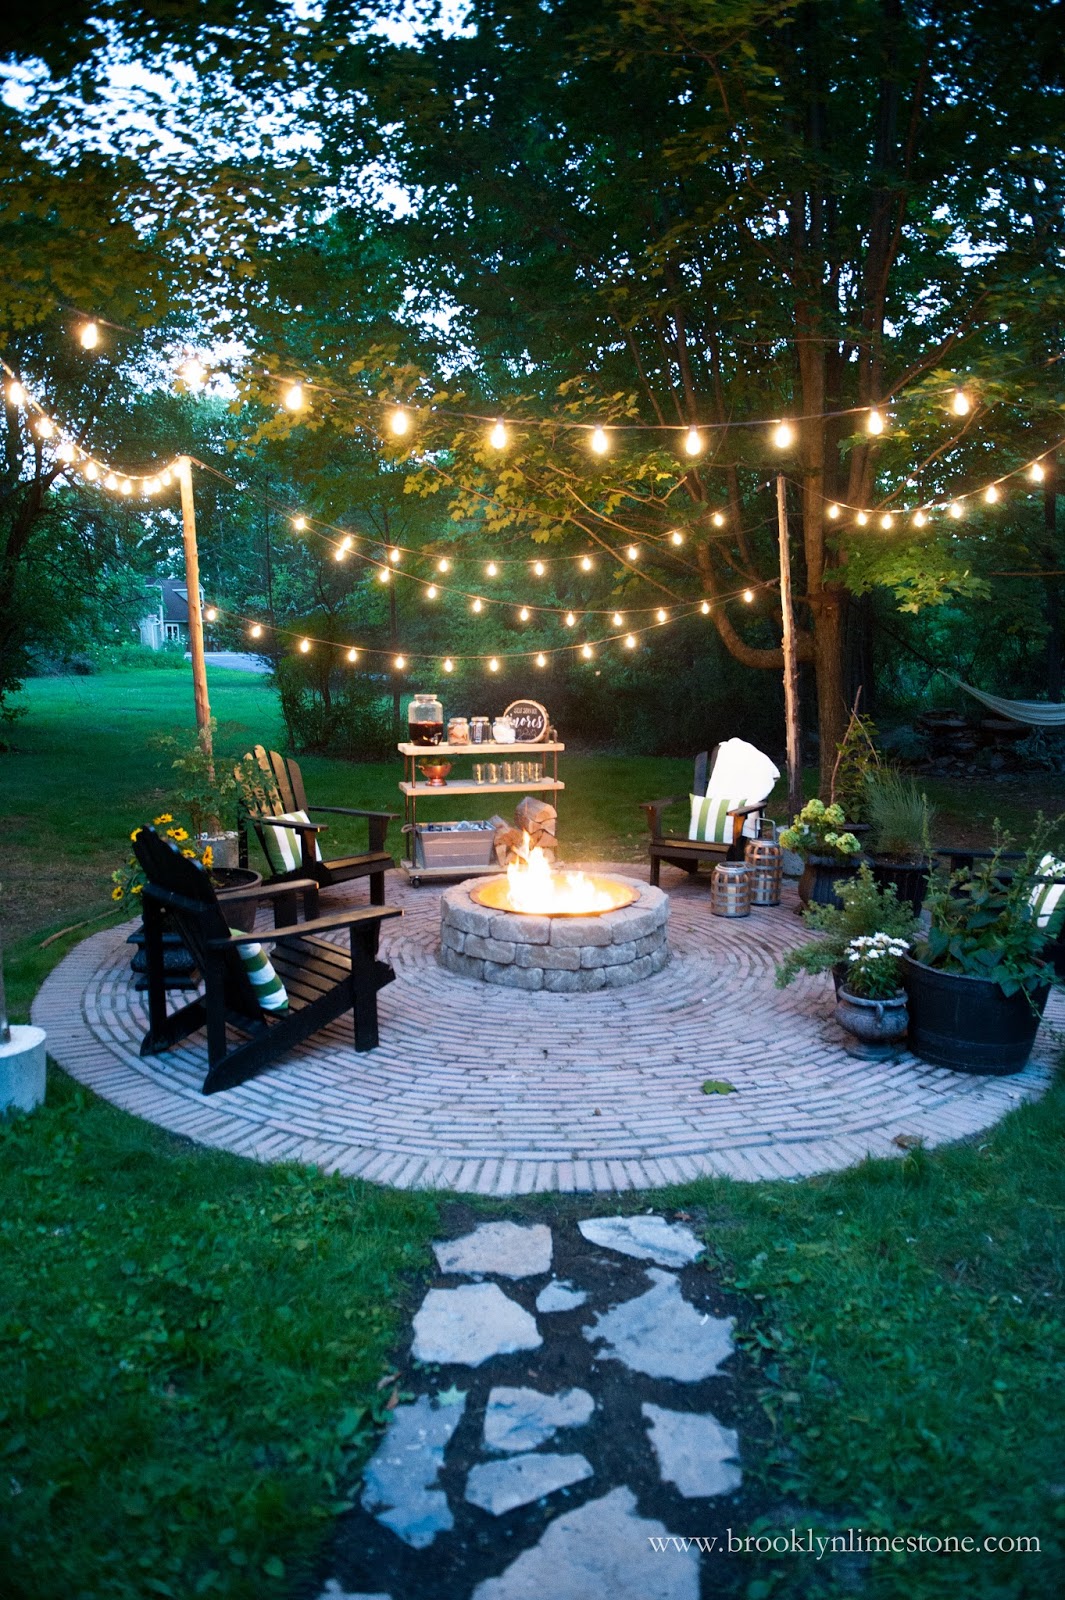 An outdoor firepit with strings of light around it.